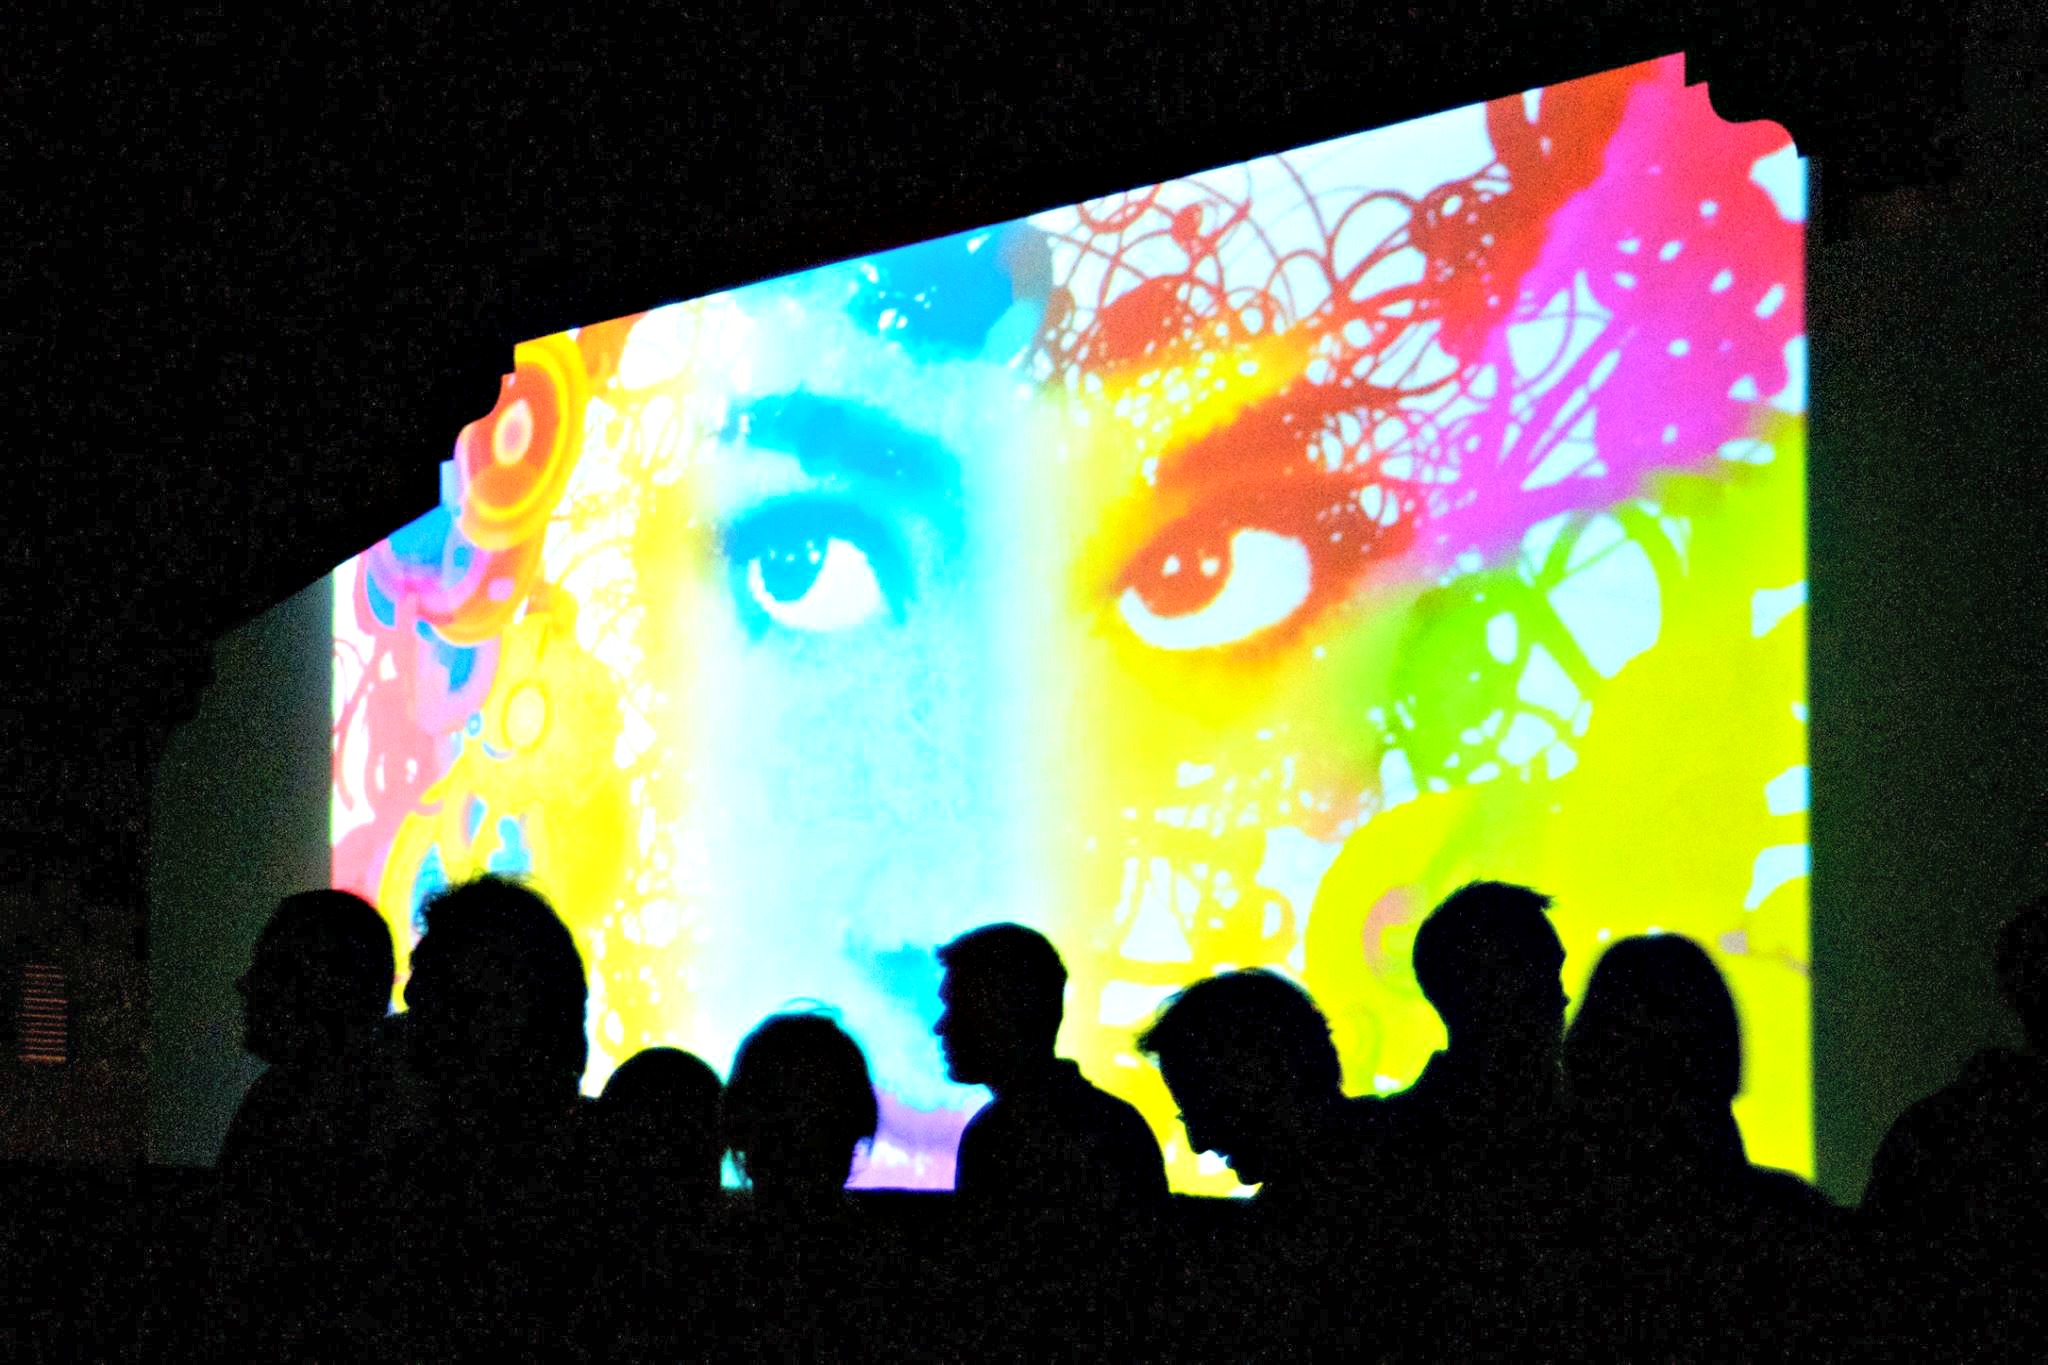 Digitally projected woman's face at Digital Graffiti in Alys Beach for Highway 30-A arts blog